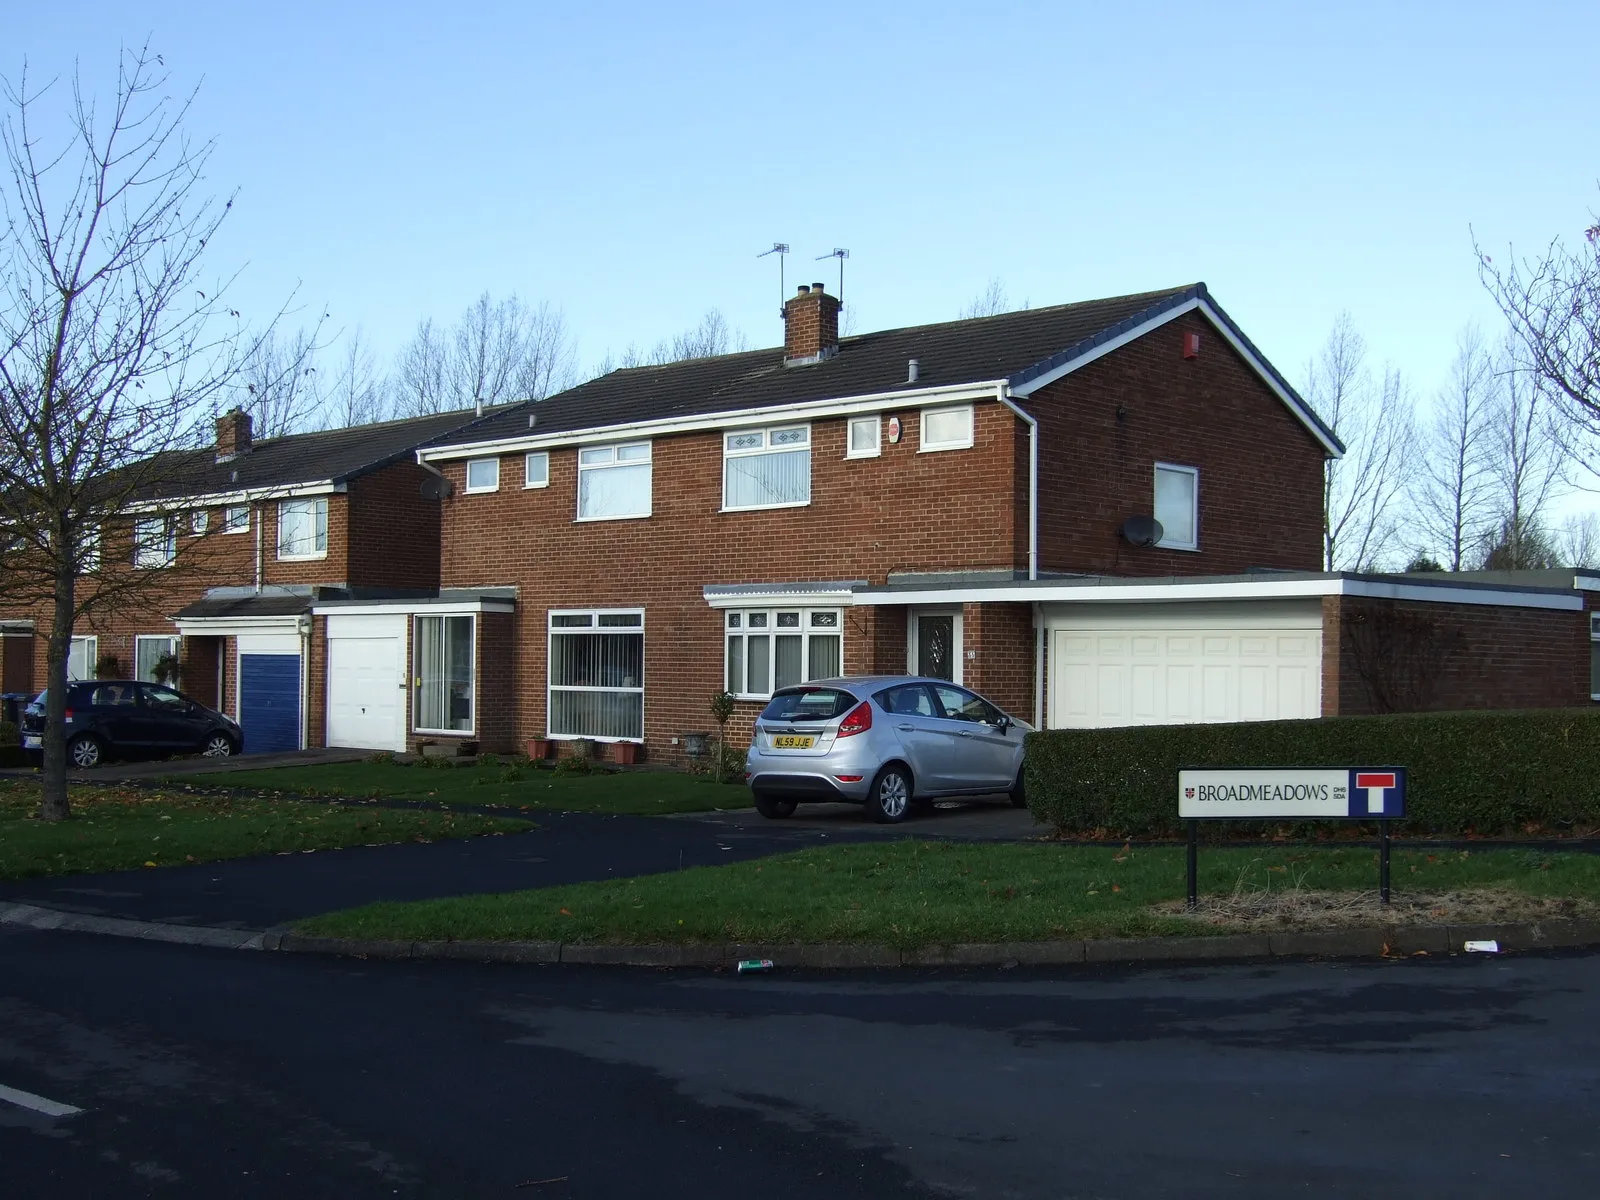 Photo showing: Houses on Broadmeadows, Bowburn